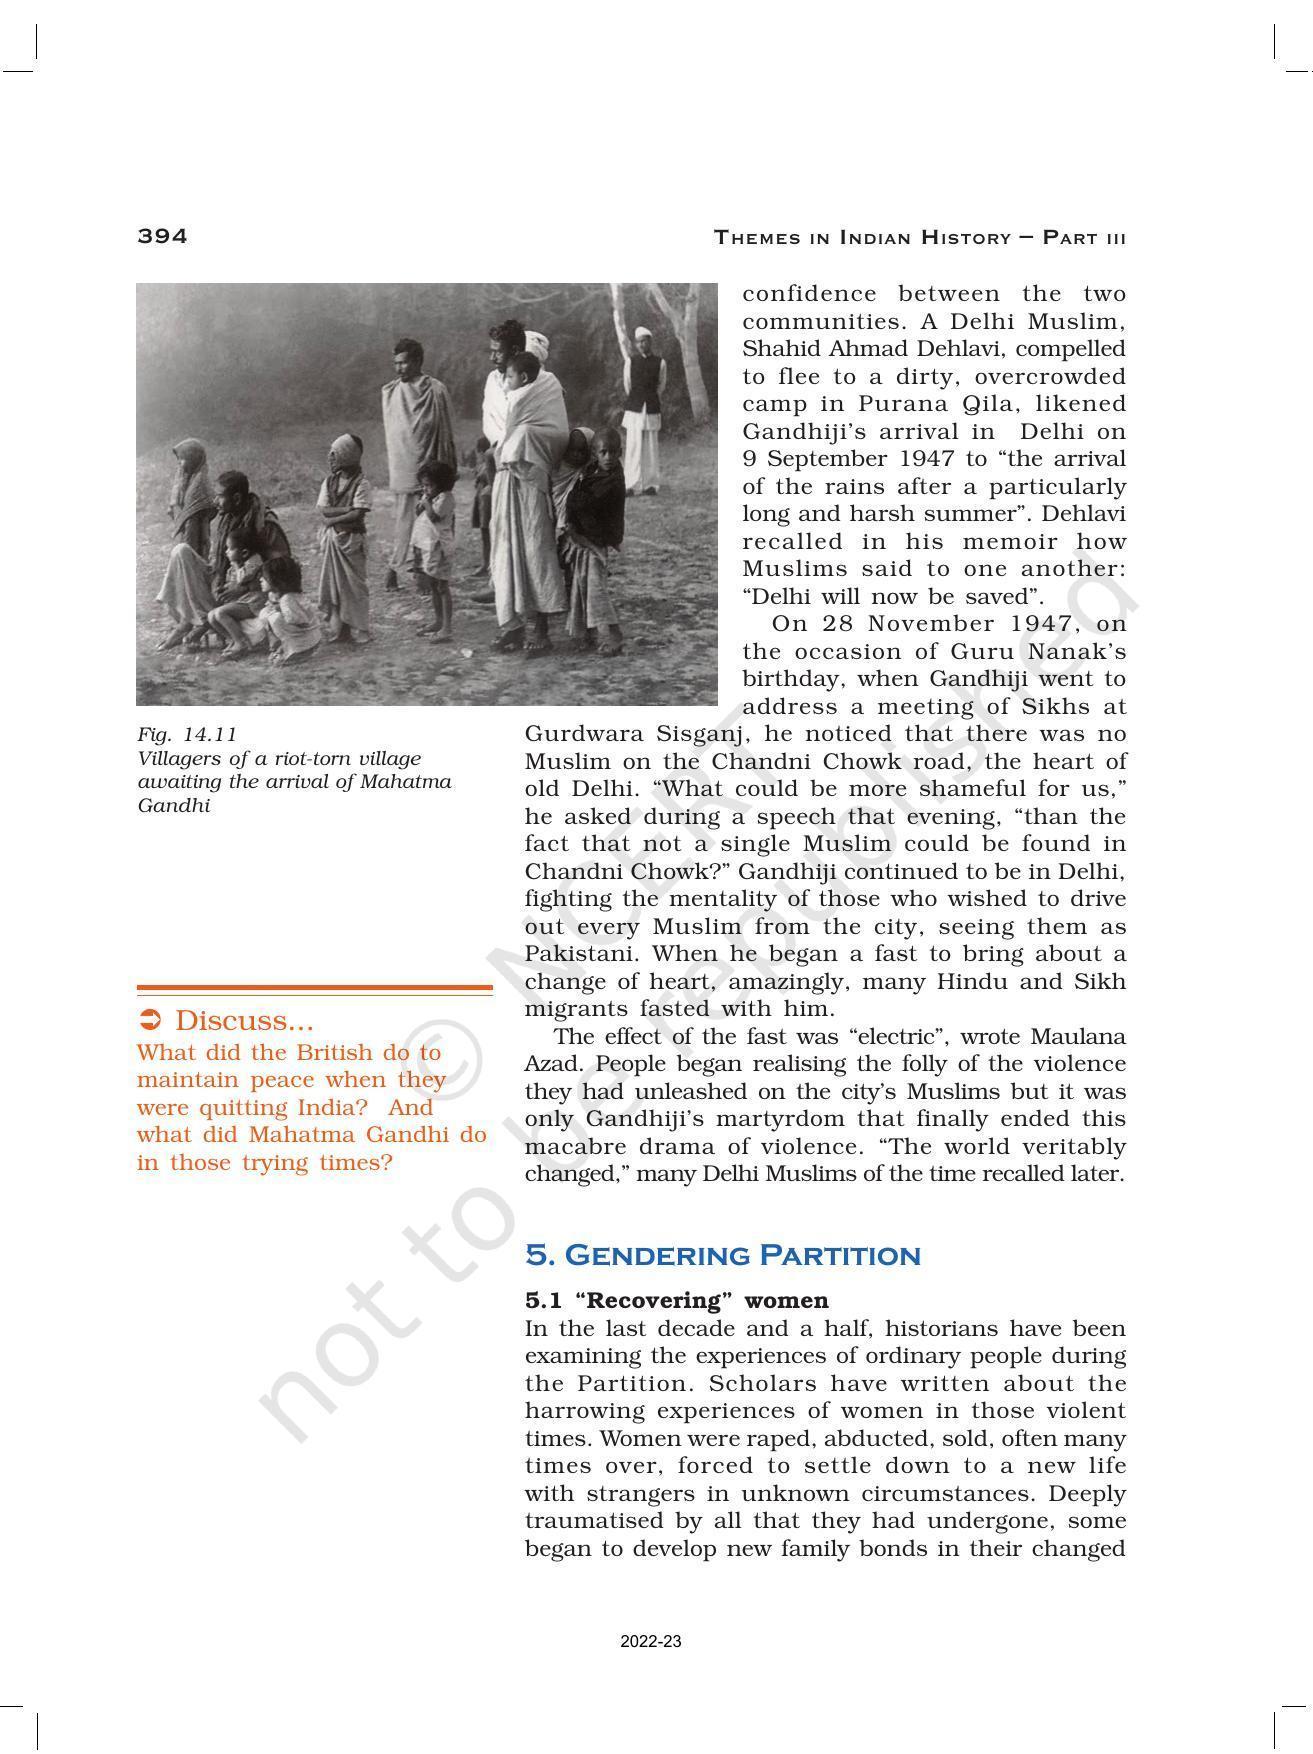 NCERT Book for Class 12 History (Part-III) Chapter 14 Understanding Partition - Page 19